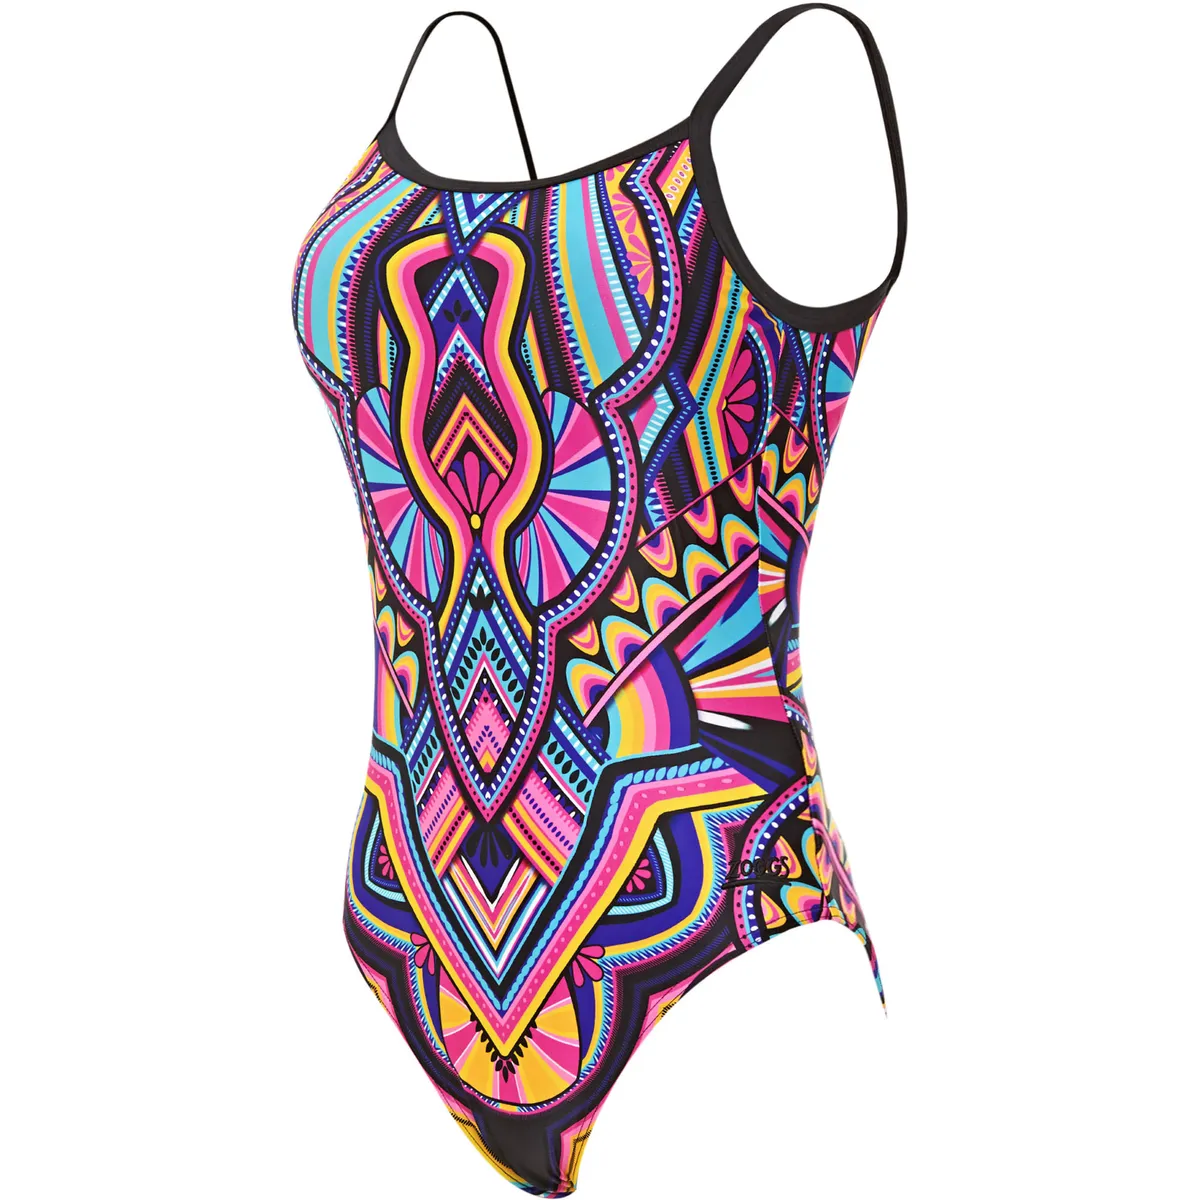 A multi-coloured swimming costume on a white background.